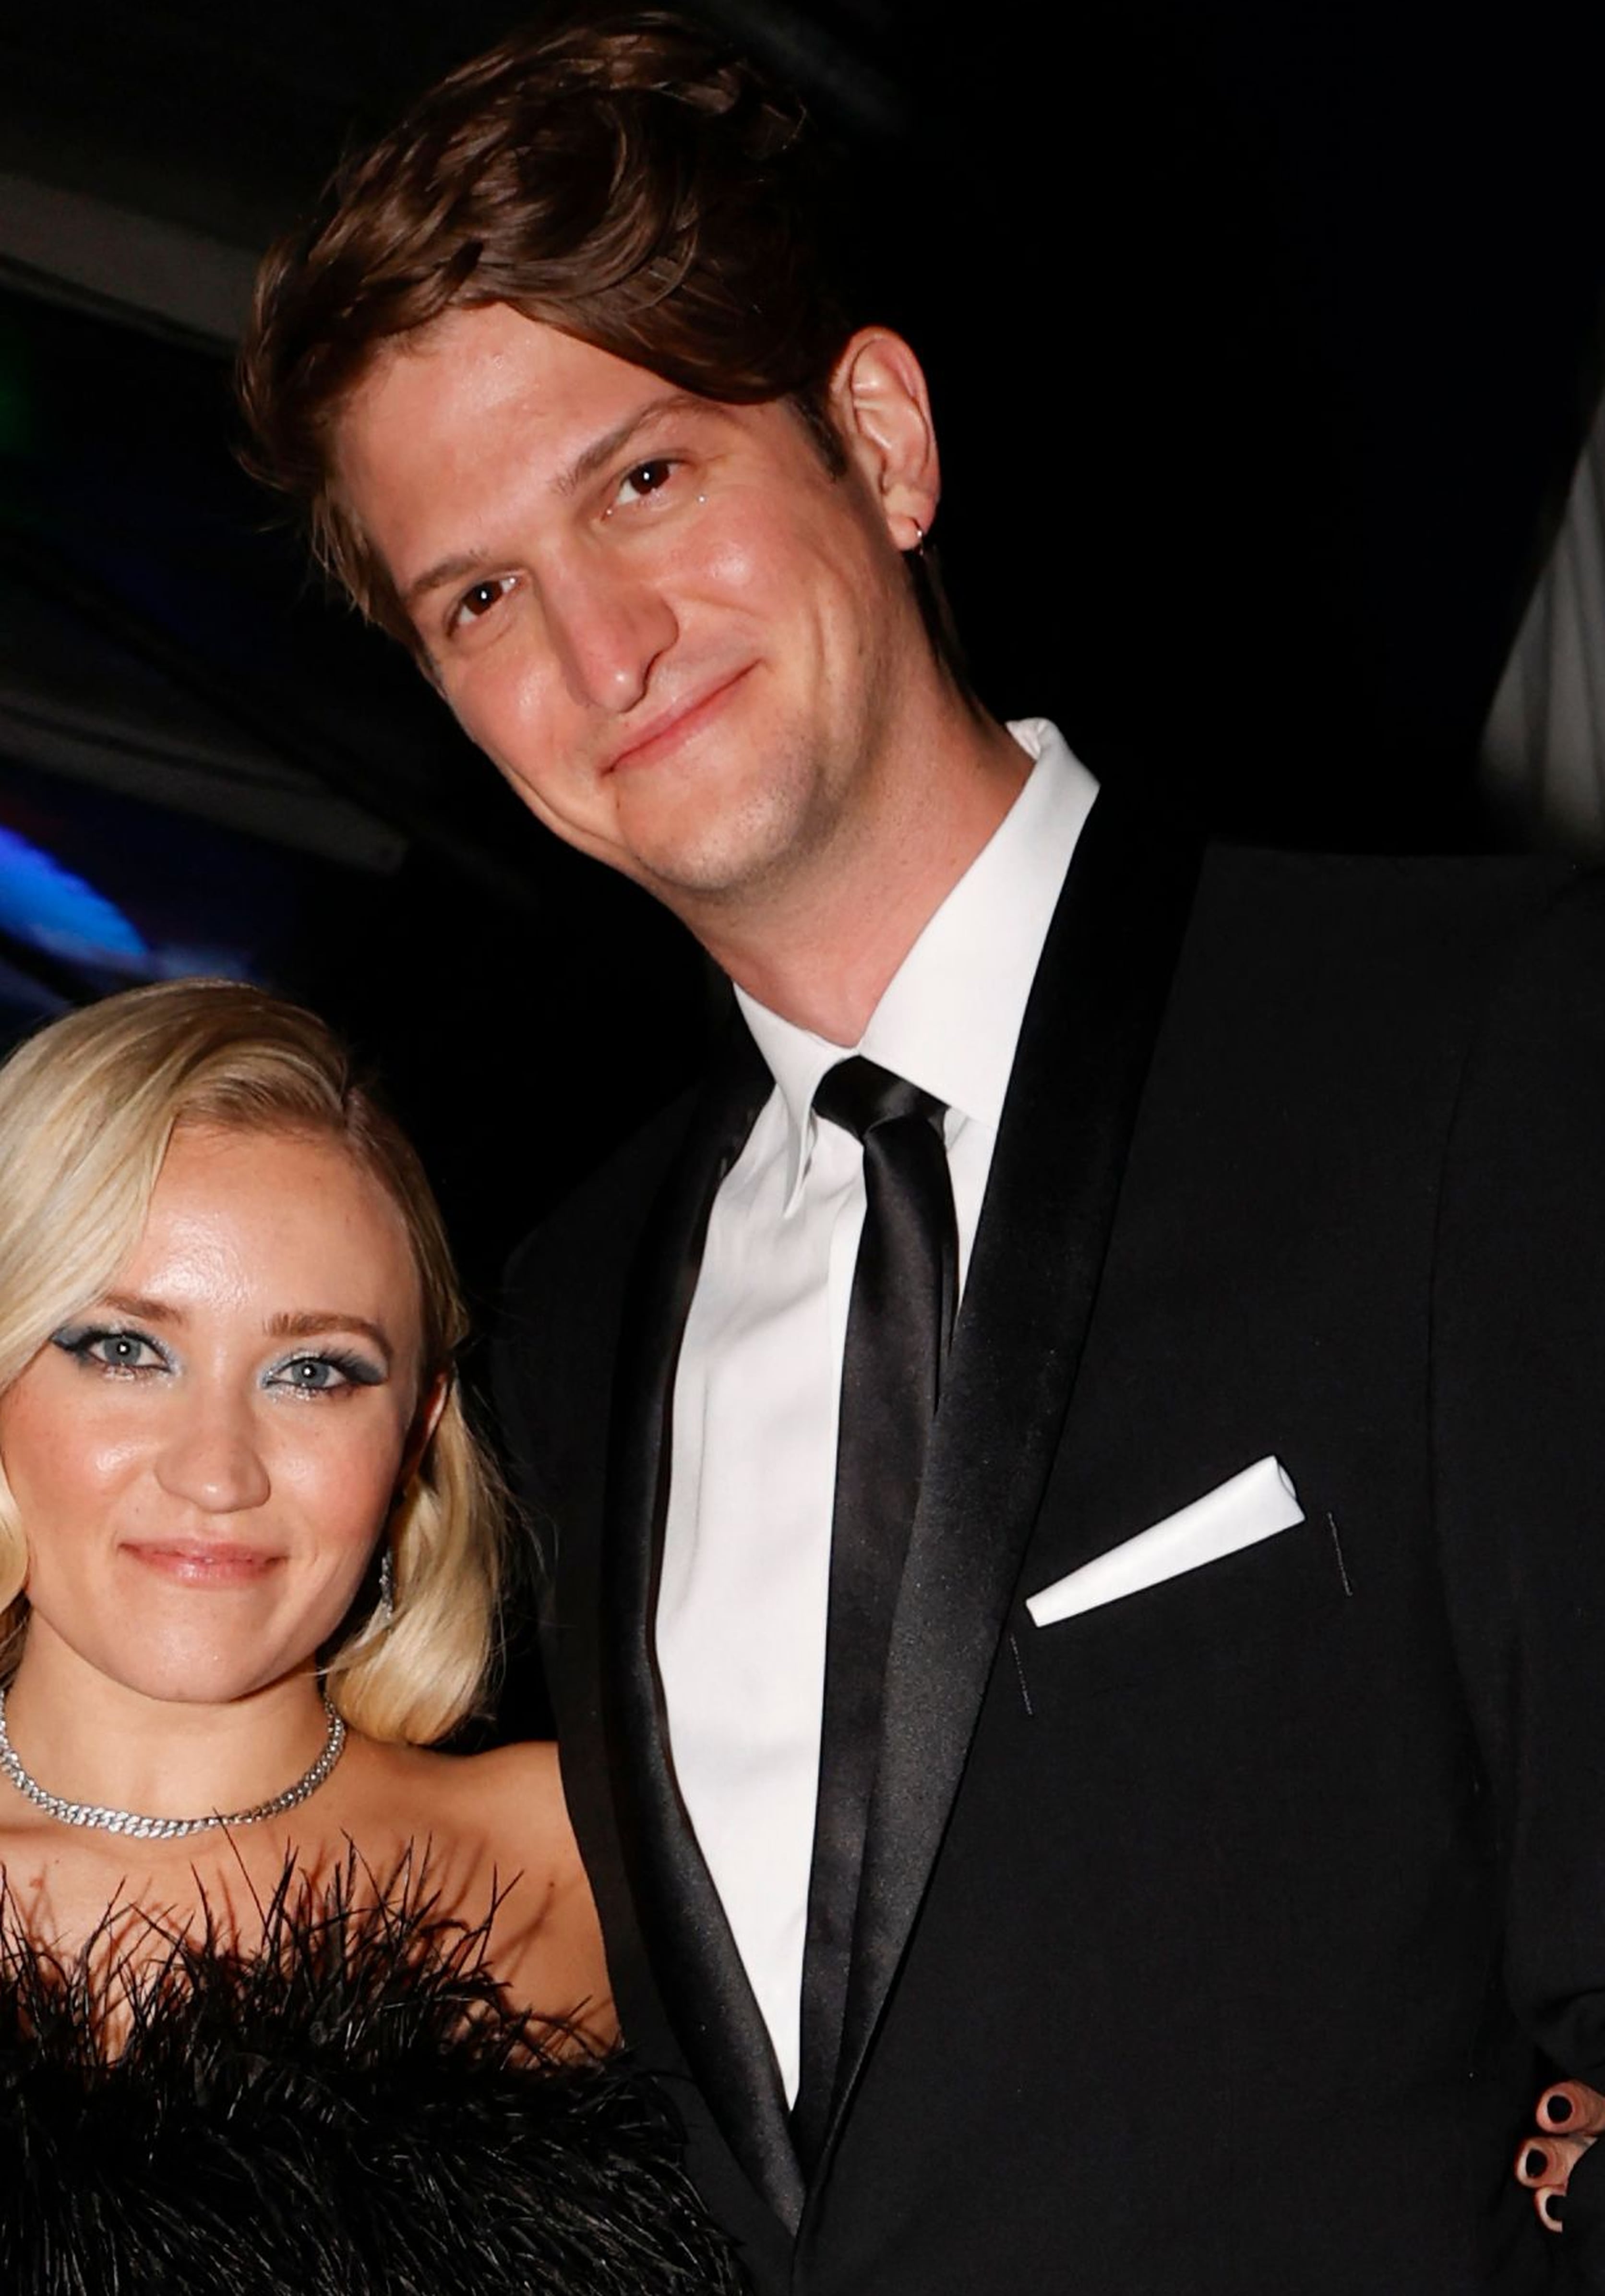 Emily Osment Is Engaged to Boyfriend Jack Anthony: “I Did Not Know Life Could Be This Sweet”